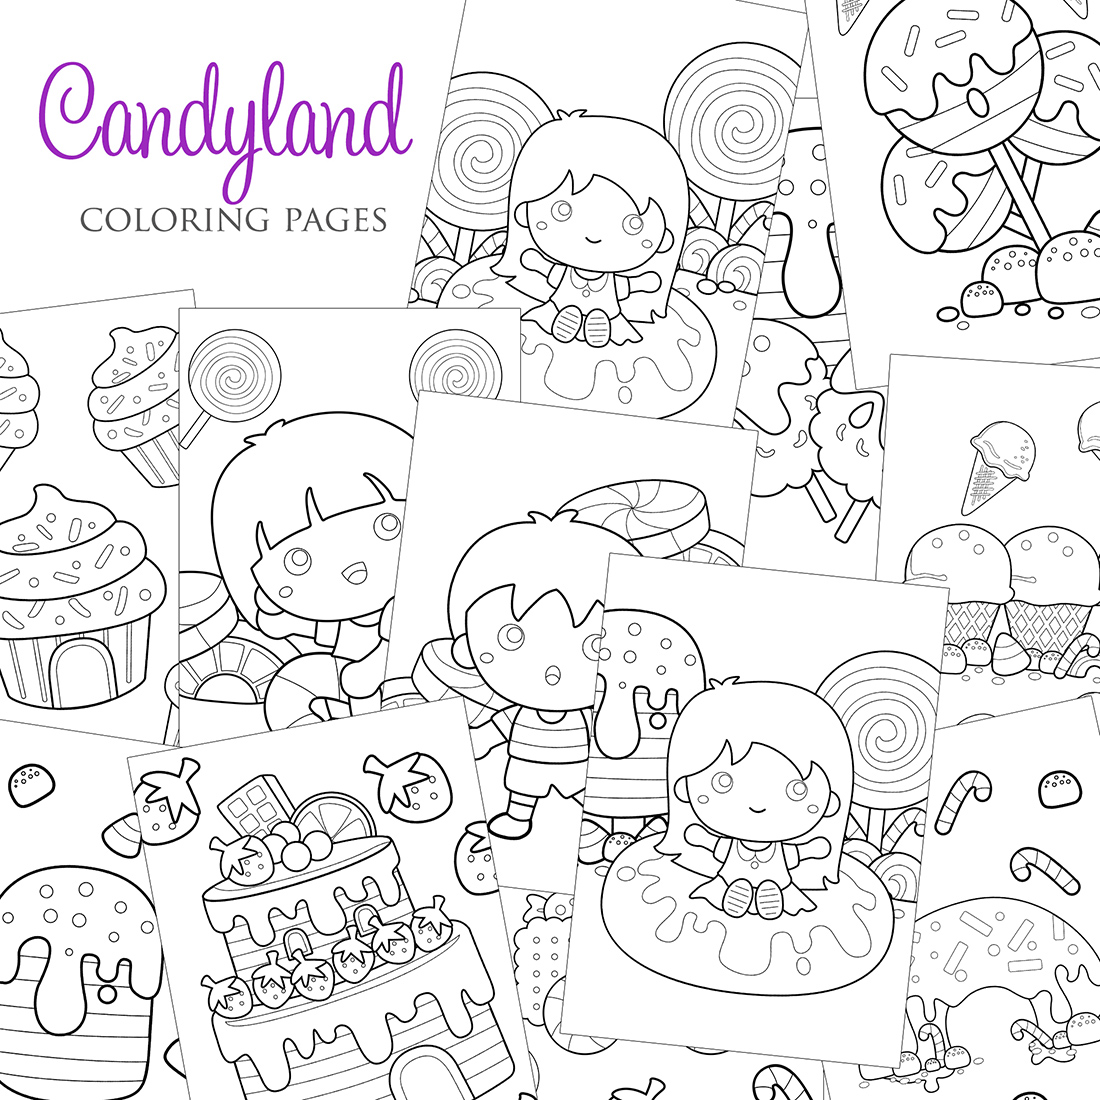 Candyland kids adult a coloring pages